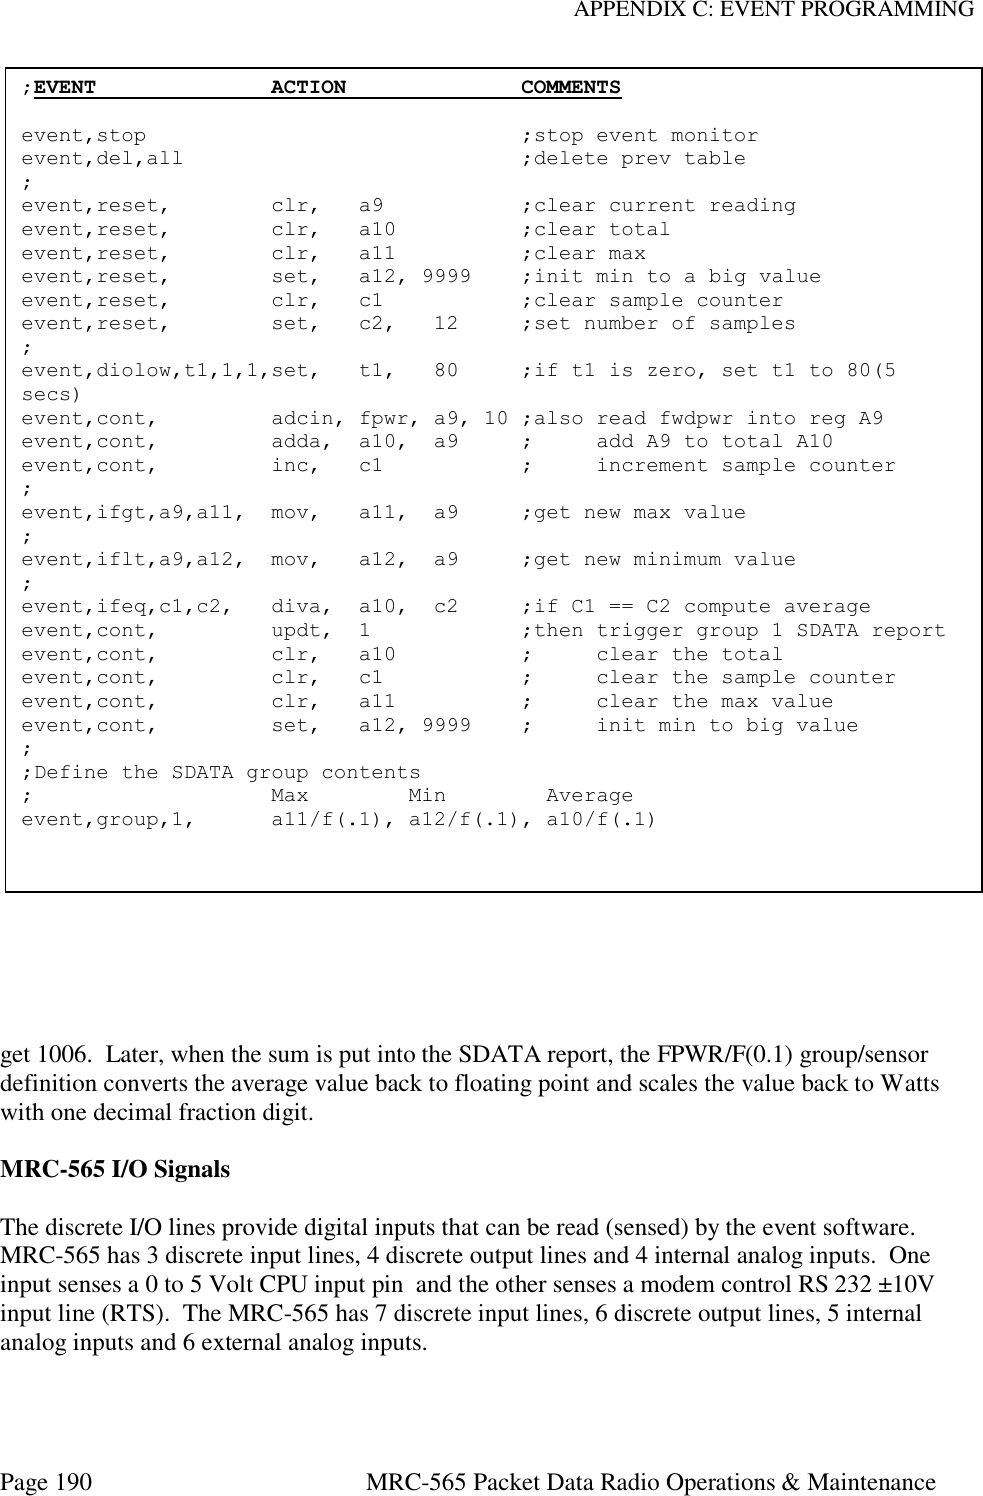 APPENDIX C: EVENT PROGRAMMING Page 190  MRC-565 Packet Data Radio Operations &amp; Maintenance      get 1006.  Later, when the sum is put into the SDATA report, the FPWR/F(0.1) group/sensor definition converts the average value back to floating point and scales the value back to Watts with one decimal fraction digit.   MRC-565 I/O Signals  The discrete I/O lines provide digital inputs that can be read (sensed) by the event software. MRC-565 has 3 discrete input lines, 4 discrete output lines and 4 internal analog inputs.  One input senses a 0 to 5 Volt CPU input pin  and the other senses a modem control RS 232 ±10V input line (RTS).  The MRC-565 has 7 discrete input lines, 6 discrete output lines, 5 internal analog inputs and 6 external analog inputs.     ;EVENT              ACTION              COMMENTS  event,stop                              ;stop event monitor event,del,all                           ;delete prev table ; event,reset,        clr,   a9           ;clear current reading event,reset,        clr,   a10          ;clear total event,reset,        clr,   a11          ;clear max event,reset,        set,   a12, 9999    ;init min to a big value event,reset,        clr,   c1           ;clear sample counter event,reset,        set,   c2,   12     ;set number of samples ; event,diolow,t1,1,1,set,   t1,   80     ;if t1 is zero, set t1 to 80(5 secs) event,cont,         adcin, fpwr, a9, 10 ;also read fwdpwr into reg A9 event,cont,         adda,  a10,  a9     ;     add A9 to total A10 event,cont,         inc,   c1           ;     increment sample counter ; event,ifgt,a9,a11,  mov,   a11,  a9     ;get new max value ; event,iflt,a9,a12,  mov,   a12,  a9     ;get new minimum value ; event,ifeq,c1,c2,   diva,  a10,  c2     ;if C1 == C2 compute average event,cont,         updt,  1            ;then trigger group 1 SDATA report event,cont,         clr,   a10          ;     clear the total event,cont,         clr,   c1           ;     clear the sample counter event,cont,         clr,   a11          ;     clear the max value event,cont,         set,   a12, 9999    ;     init min to big value ; ;Define the SDATA group contents ;                   Max        Min        Average event,group,1,      a11/f(.1), a12/f(.1), a10/f(.1)  